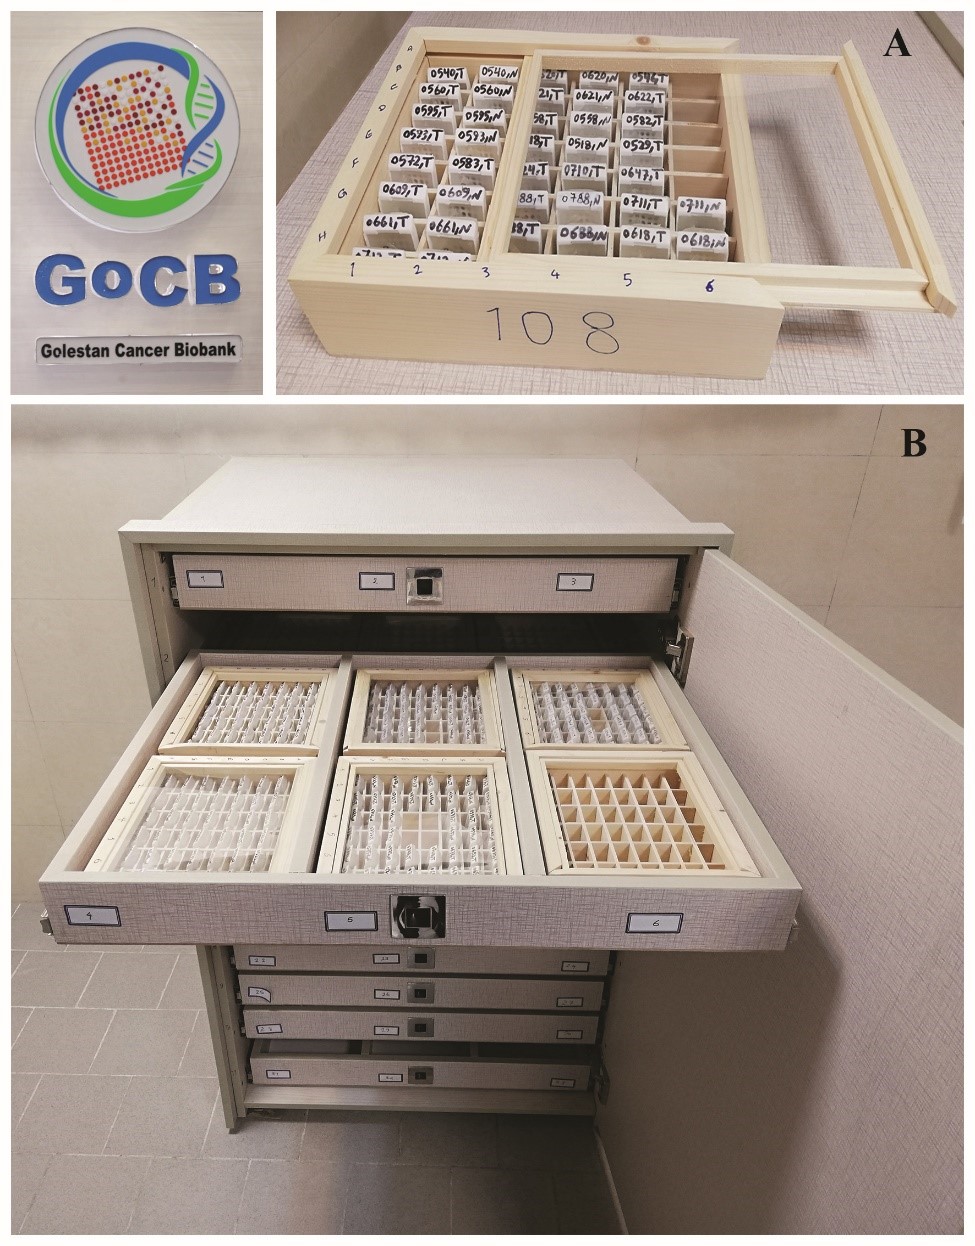 Samples of tissue that have been stored in the Golestan Cancer Biobank